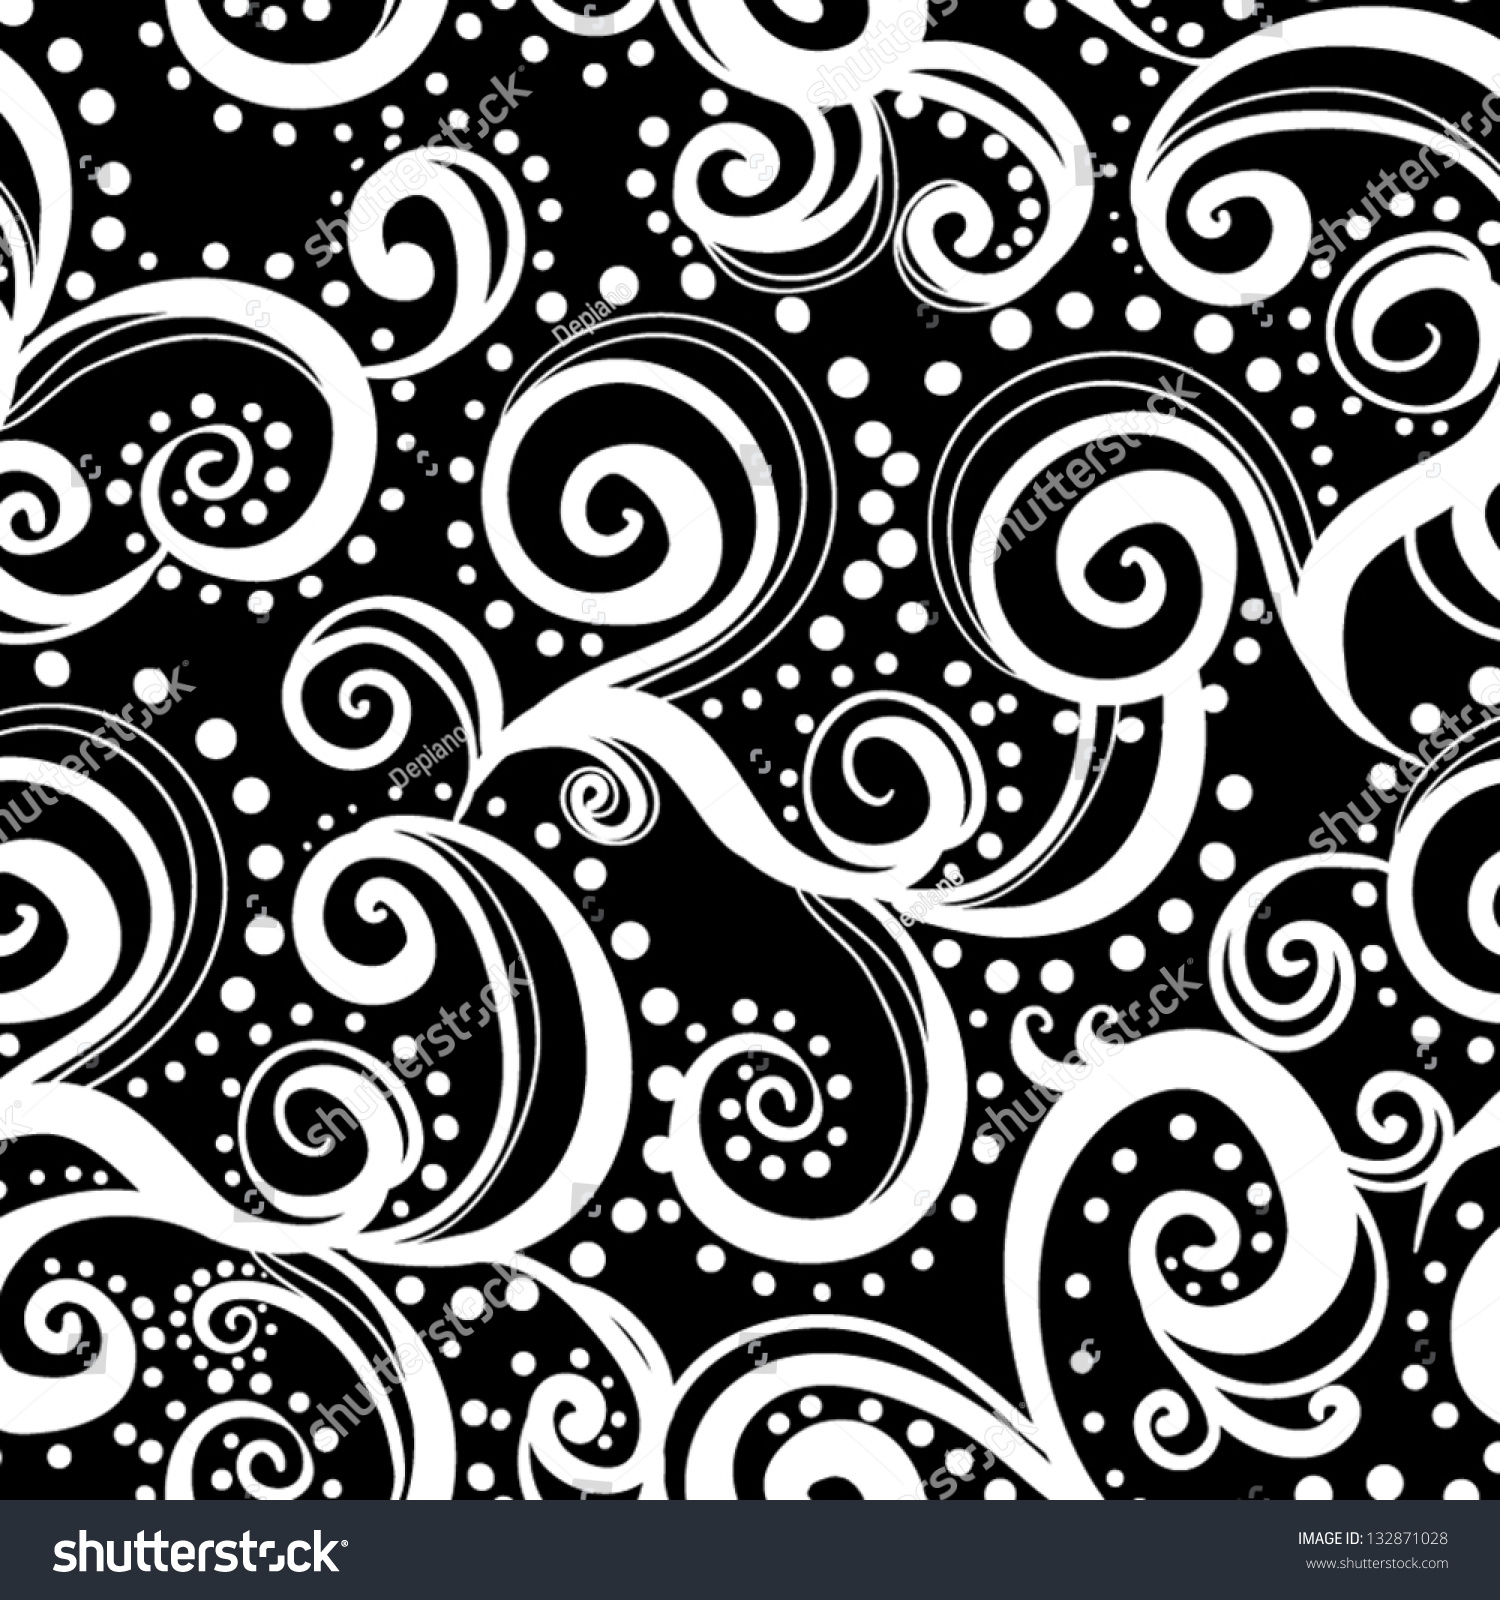 Black And White Abstract Seamless Flower Pattern Stock Vector ...